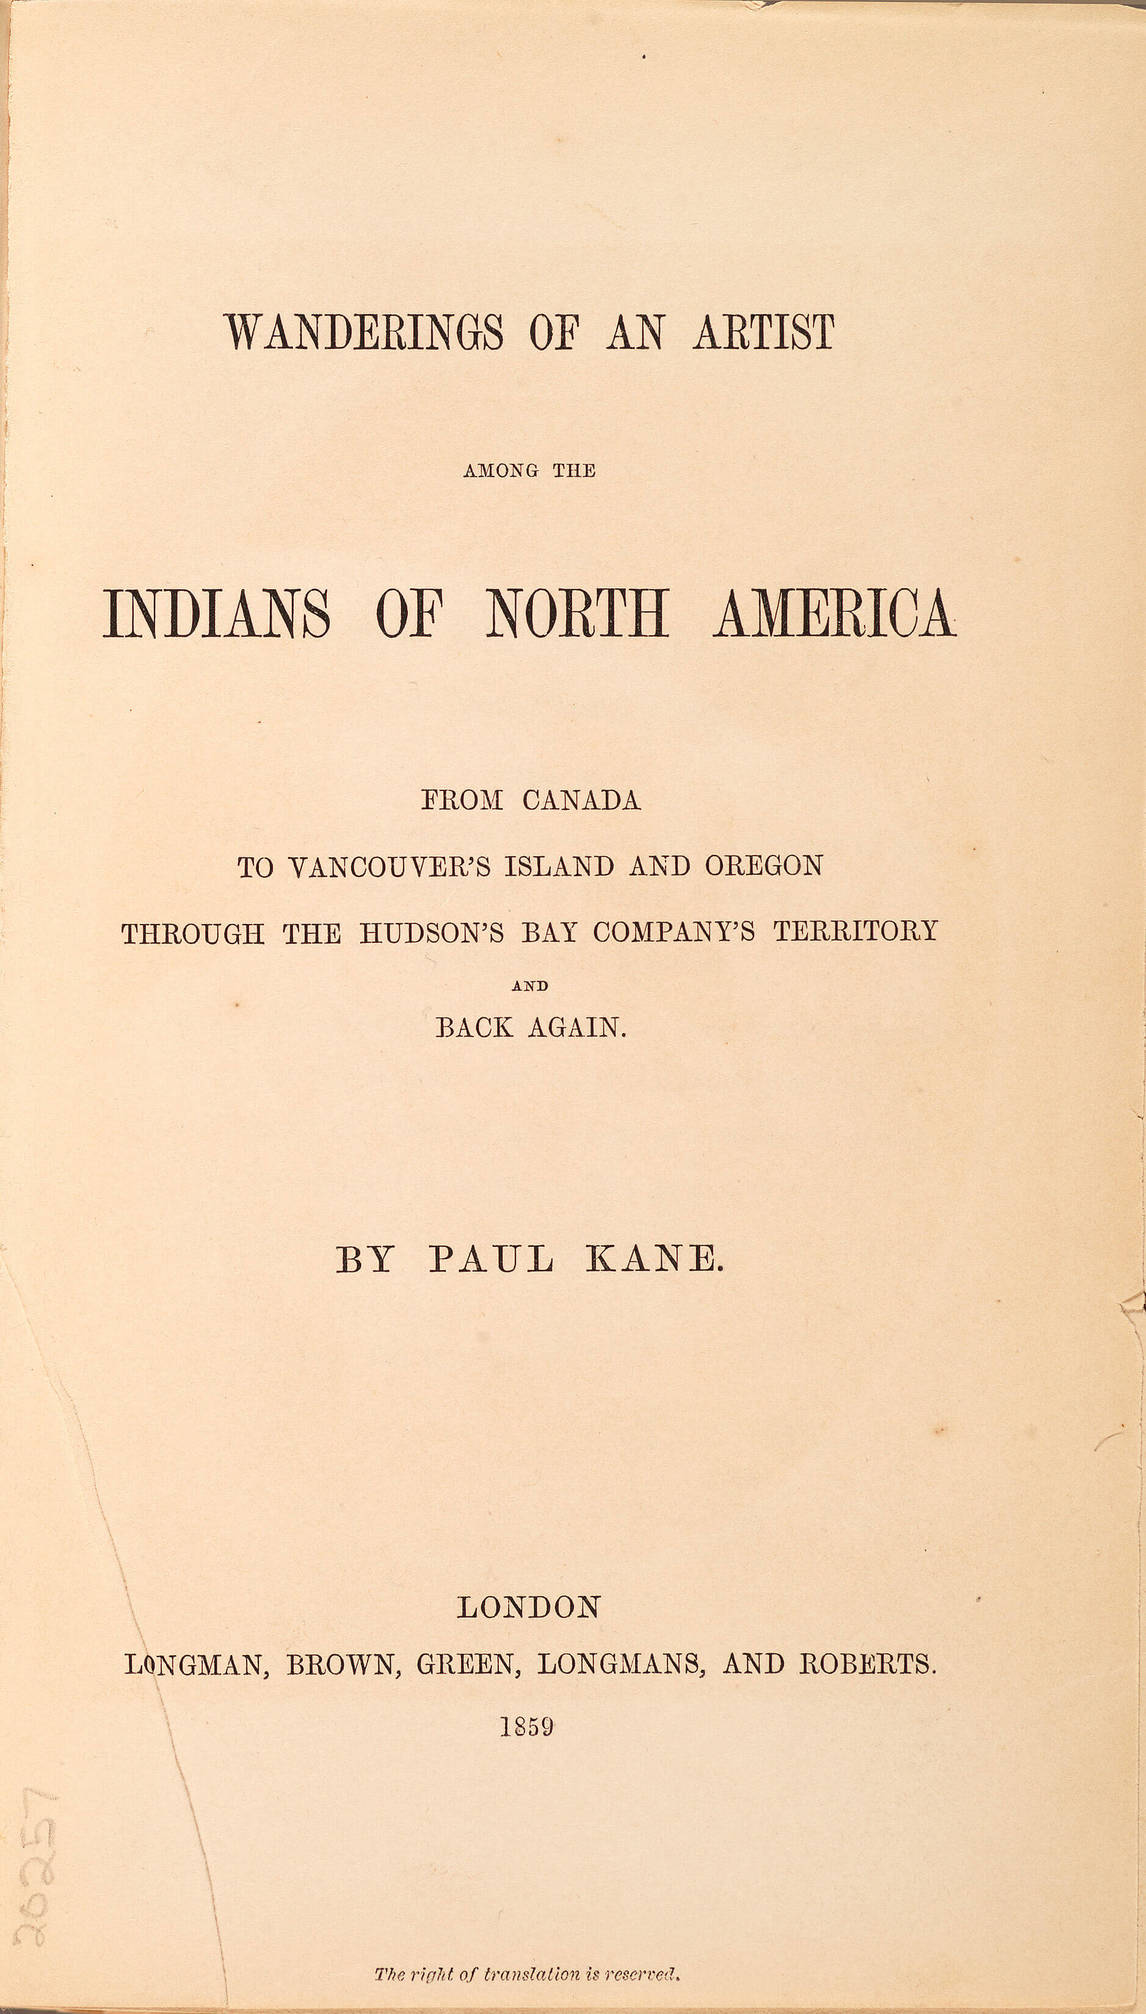 Art Canada Institute, Paul Kane, Title page of Kane’s book Wanderings of an Artist among the Indians of North America, 1859